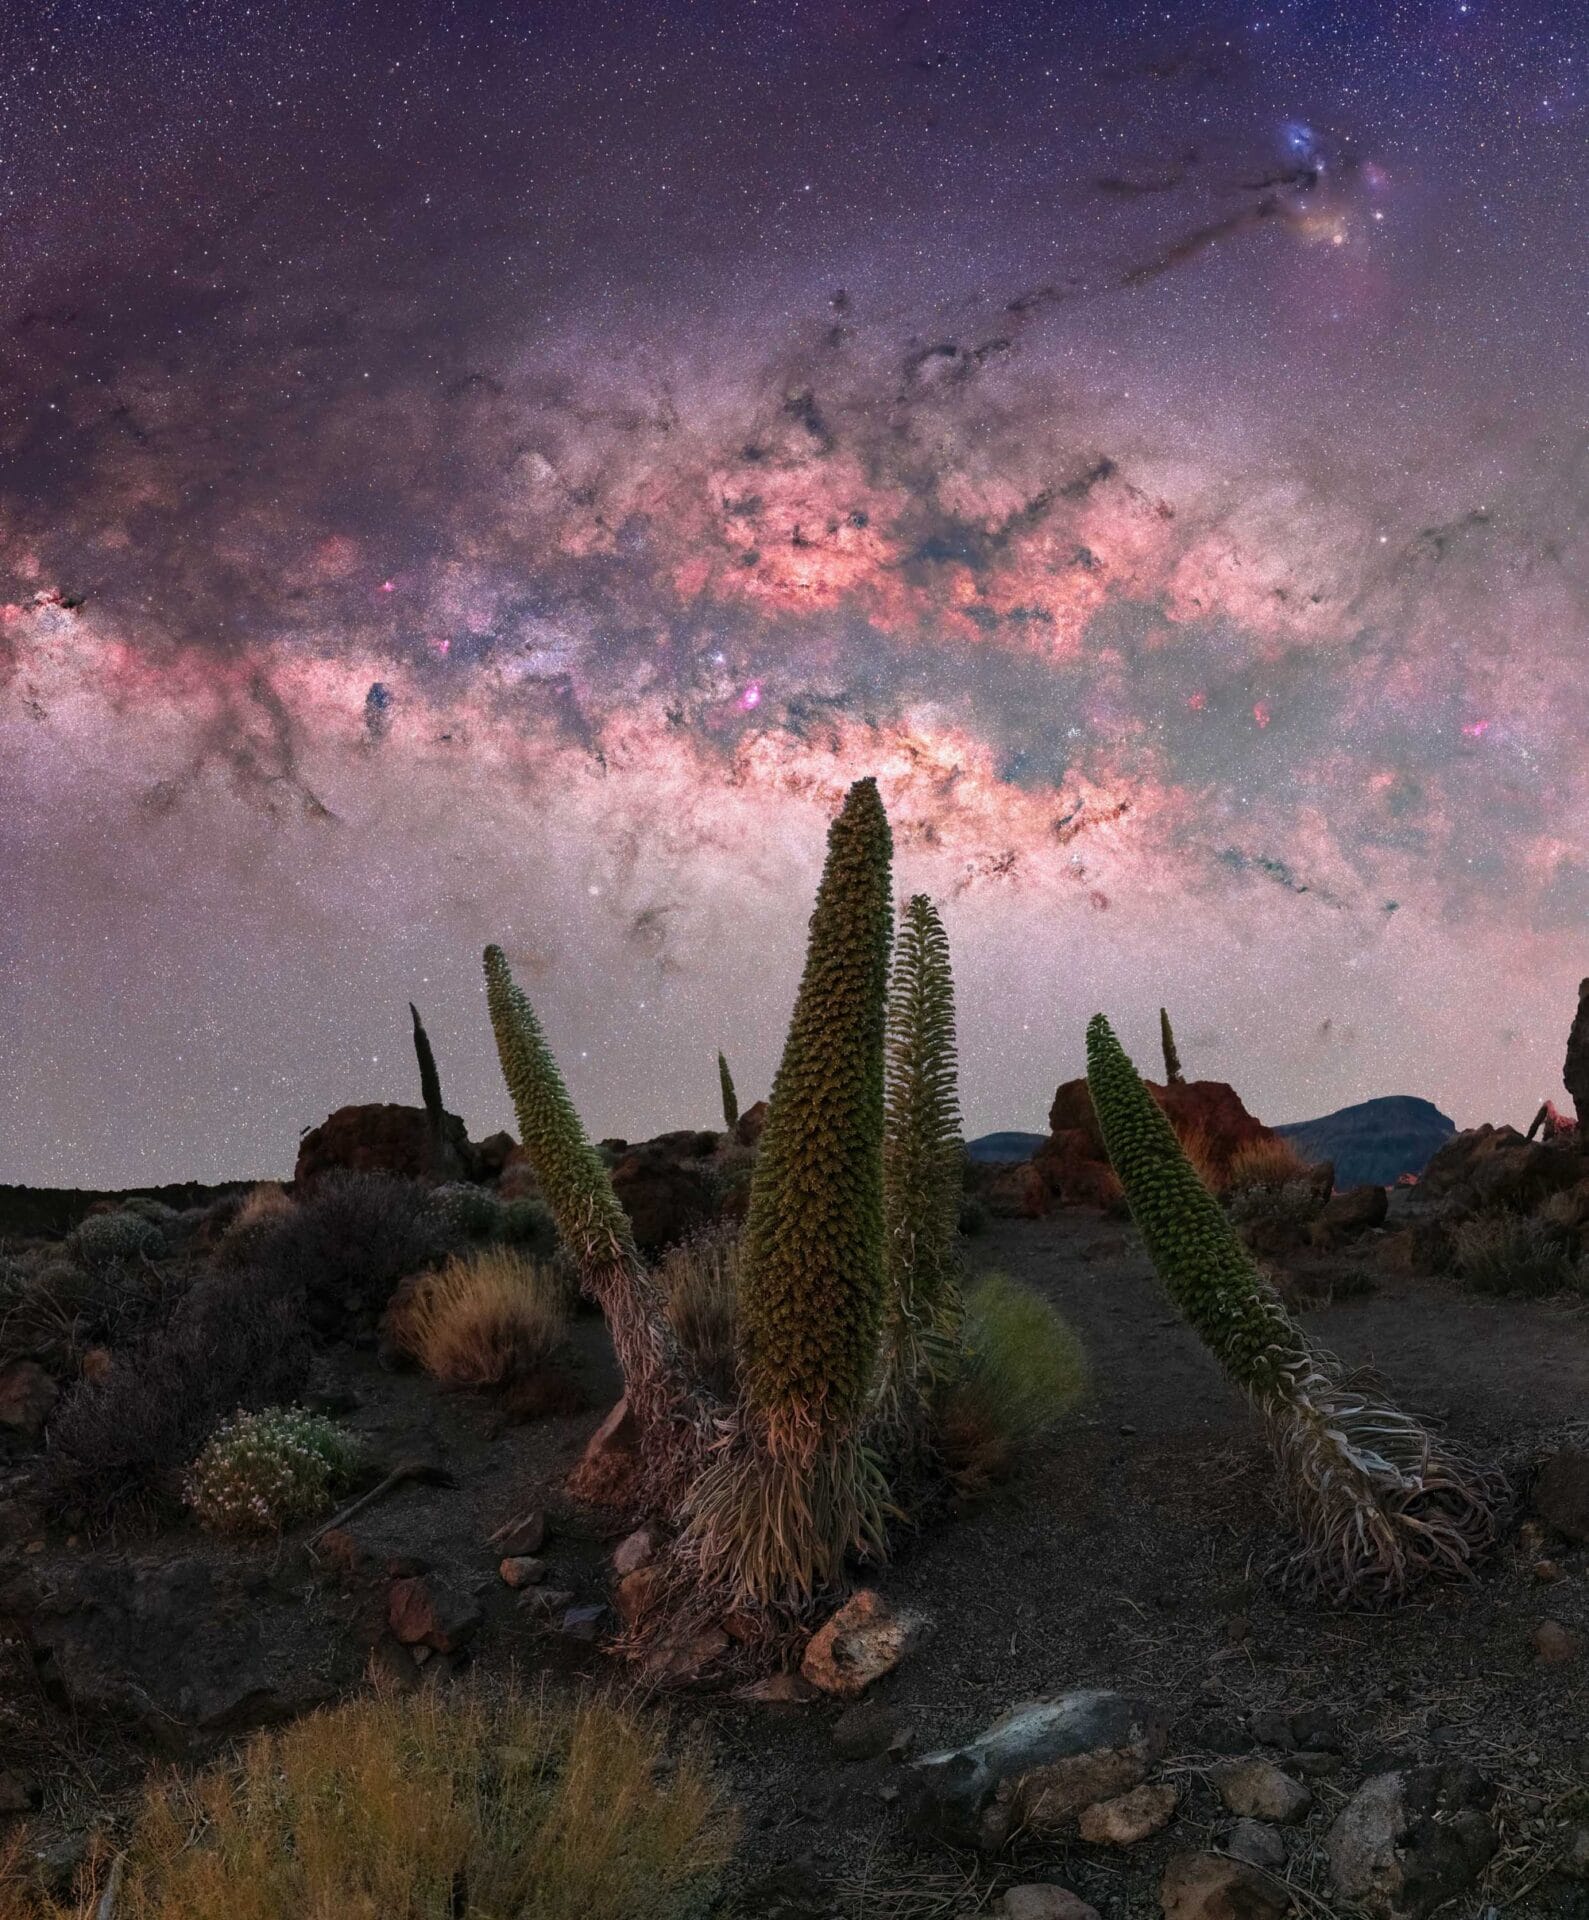 the brilliant star studded milky way above a desert with cacti